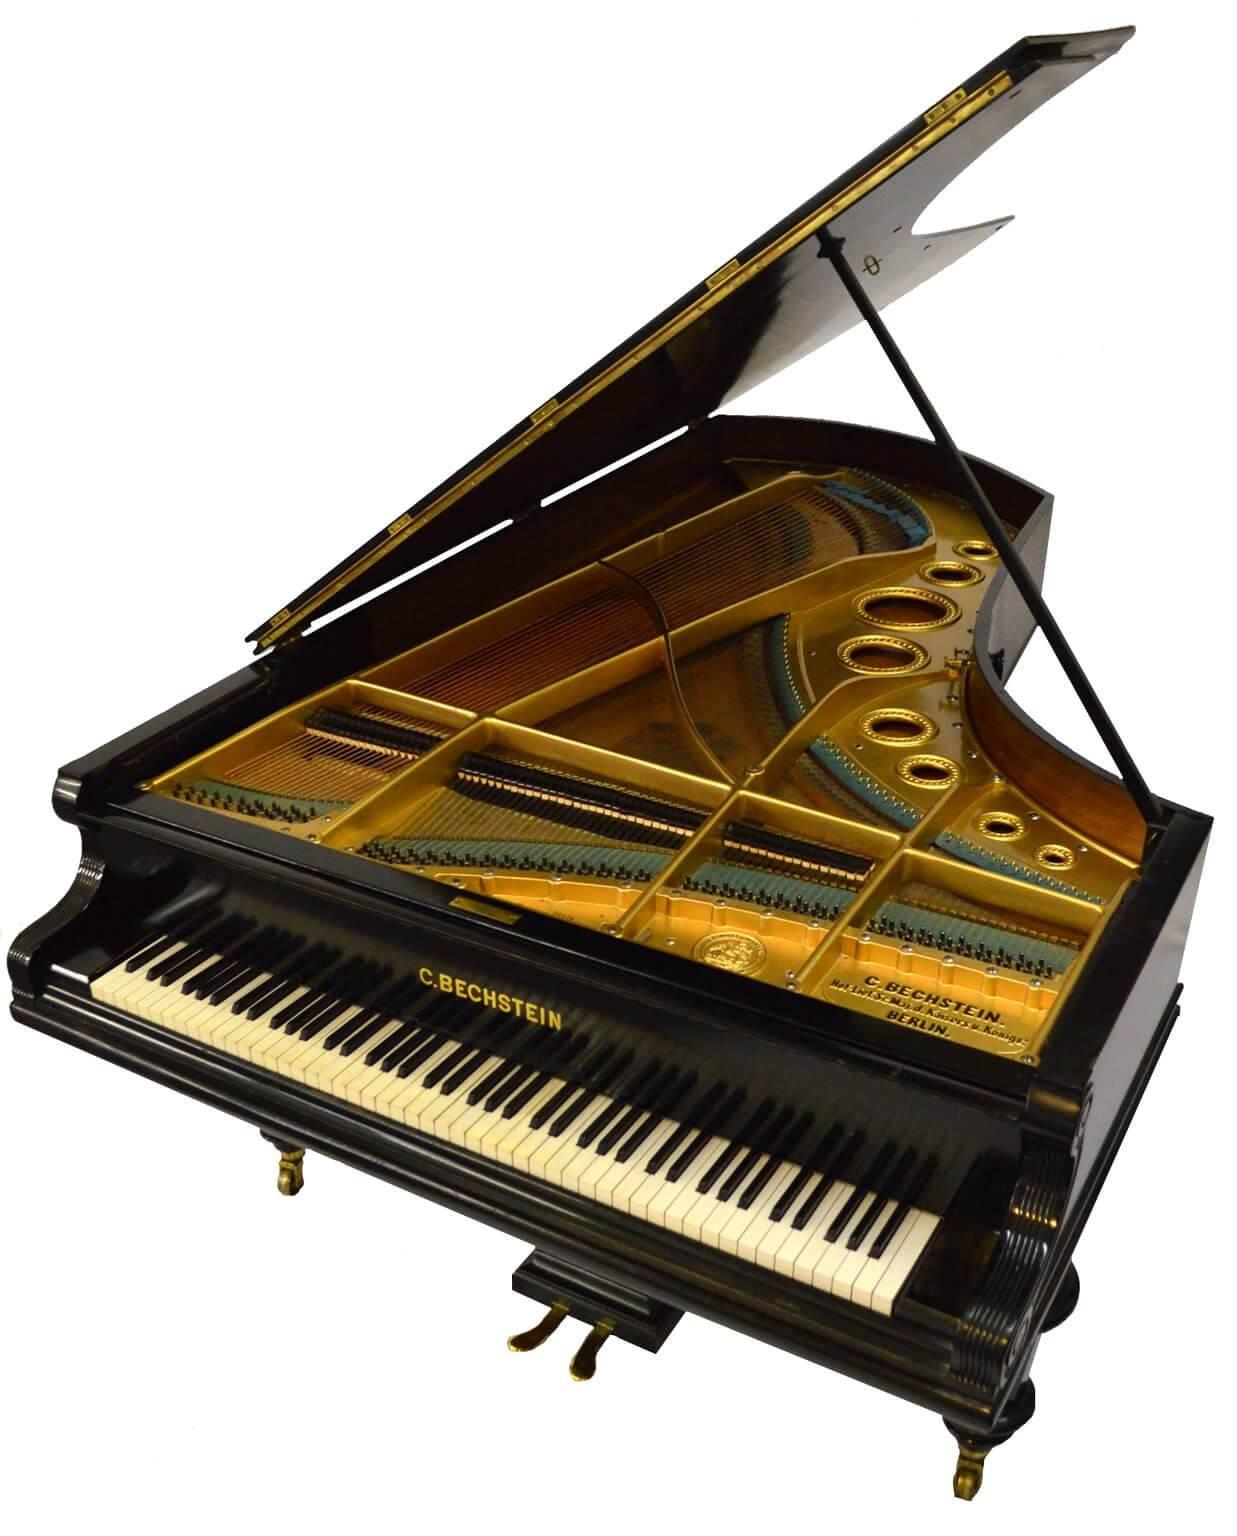 C Bechstein's Model III is the third largest of the concert sized models that the company made. Today's Bechstein comparison is the the C 234 model. This pianos offers a very high quality of sound and performance. The bass is deep and resonant, the